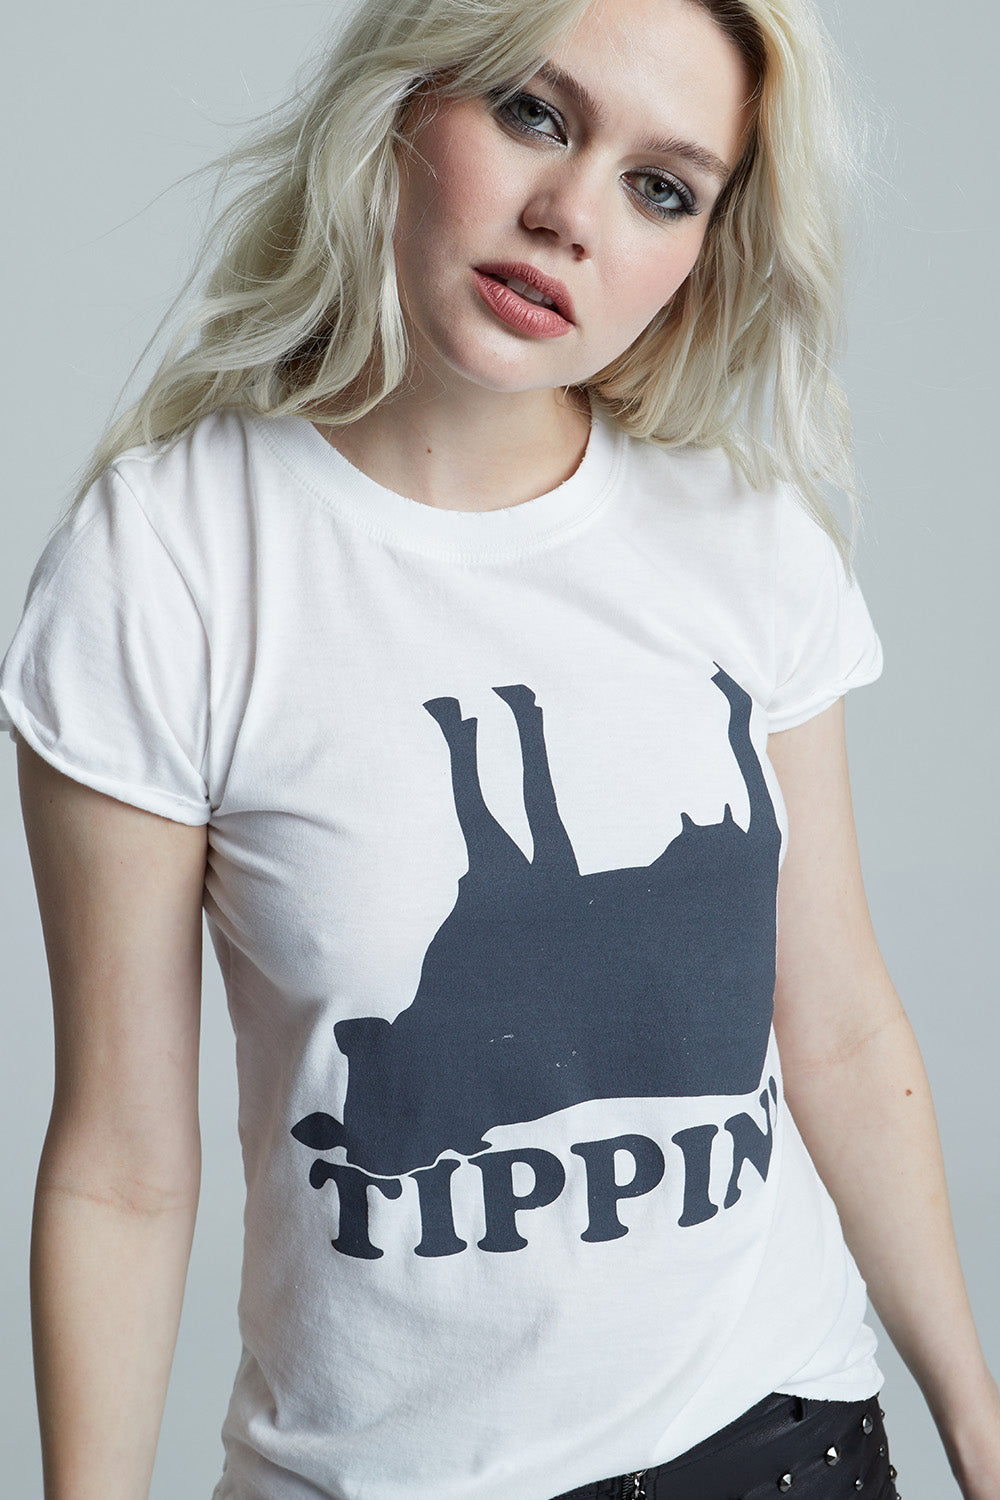 Cow Tippin' Tee